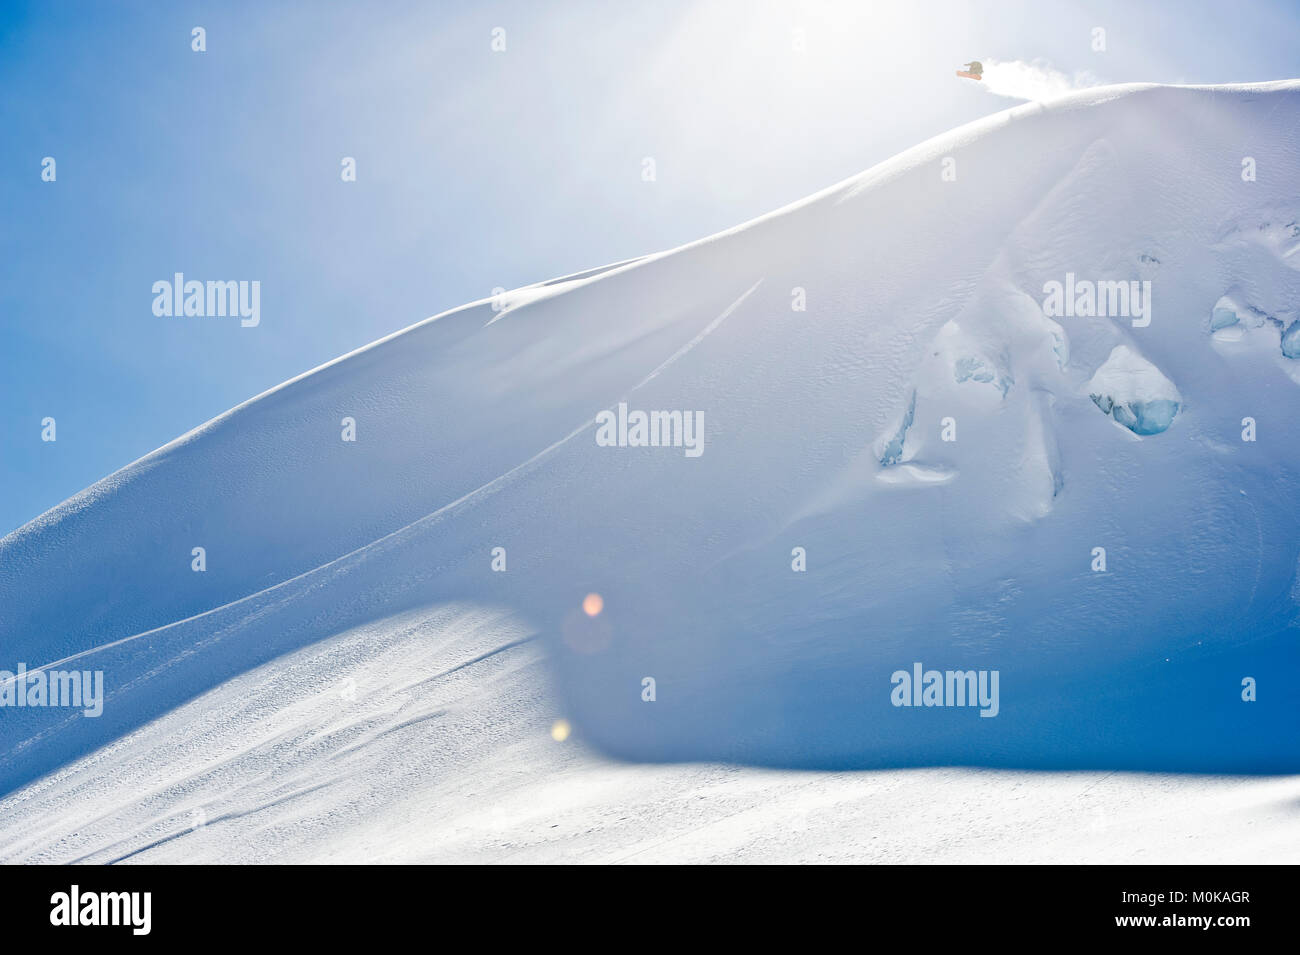 A professional, freeriding snowboarder in mid-air on a snowy slope against a blue sky; British Columbia, Canada Stock Photo